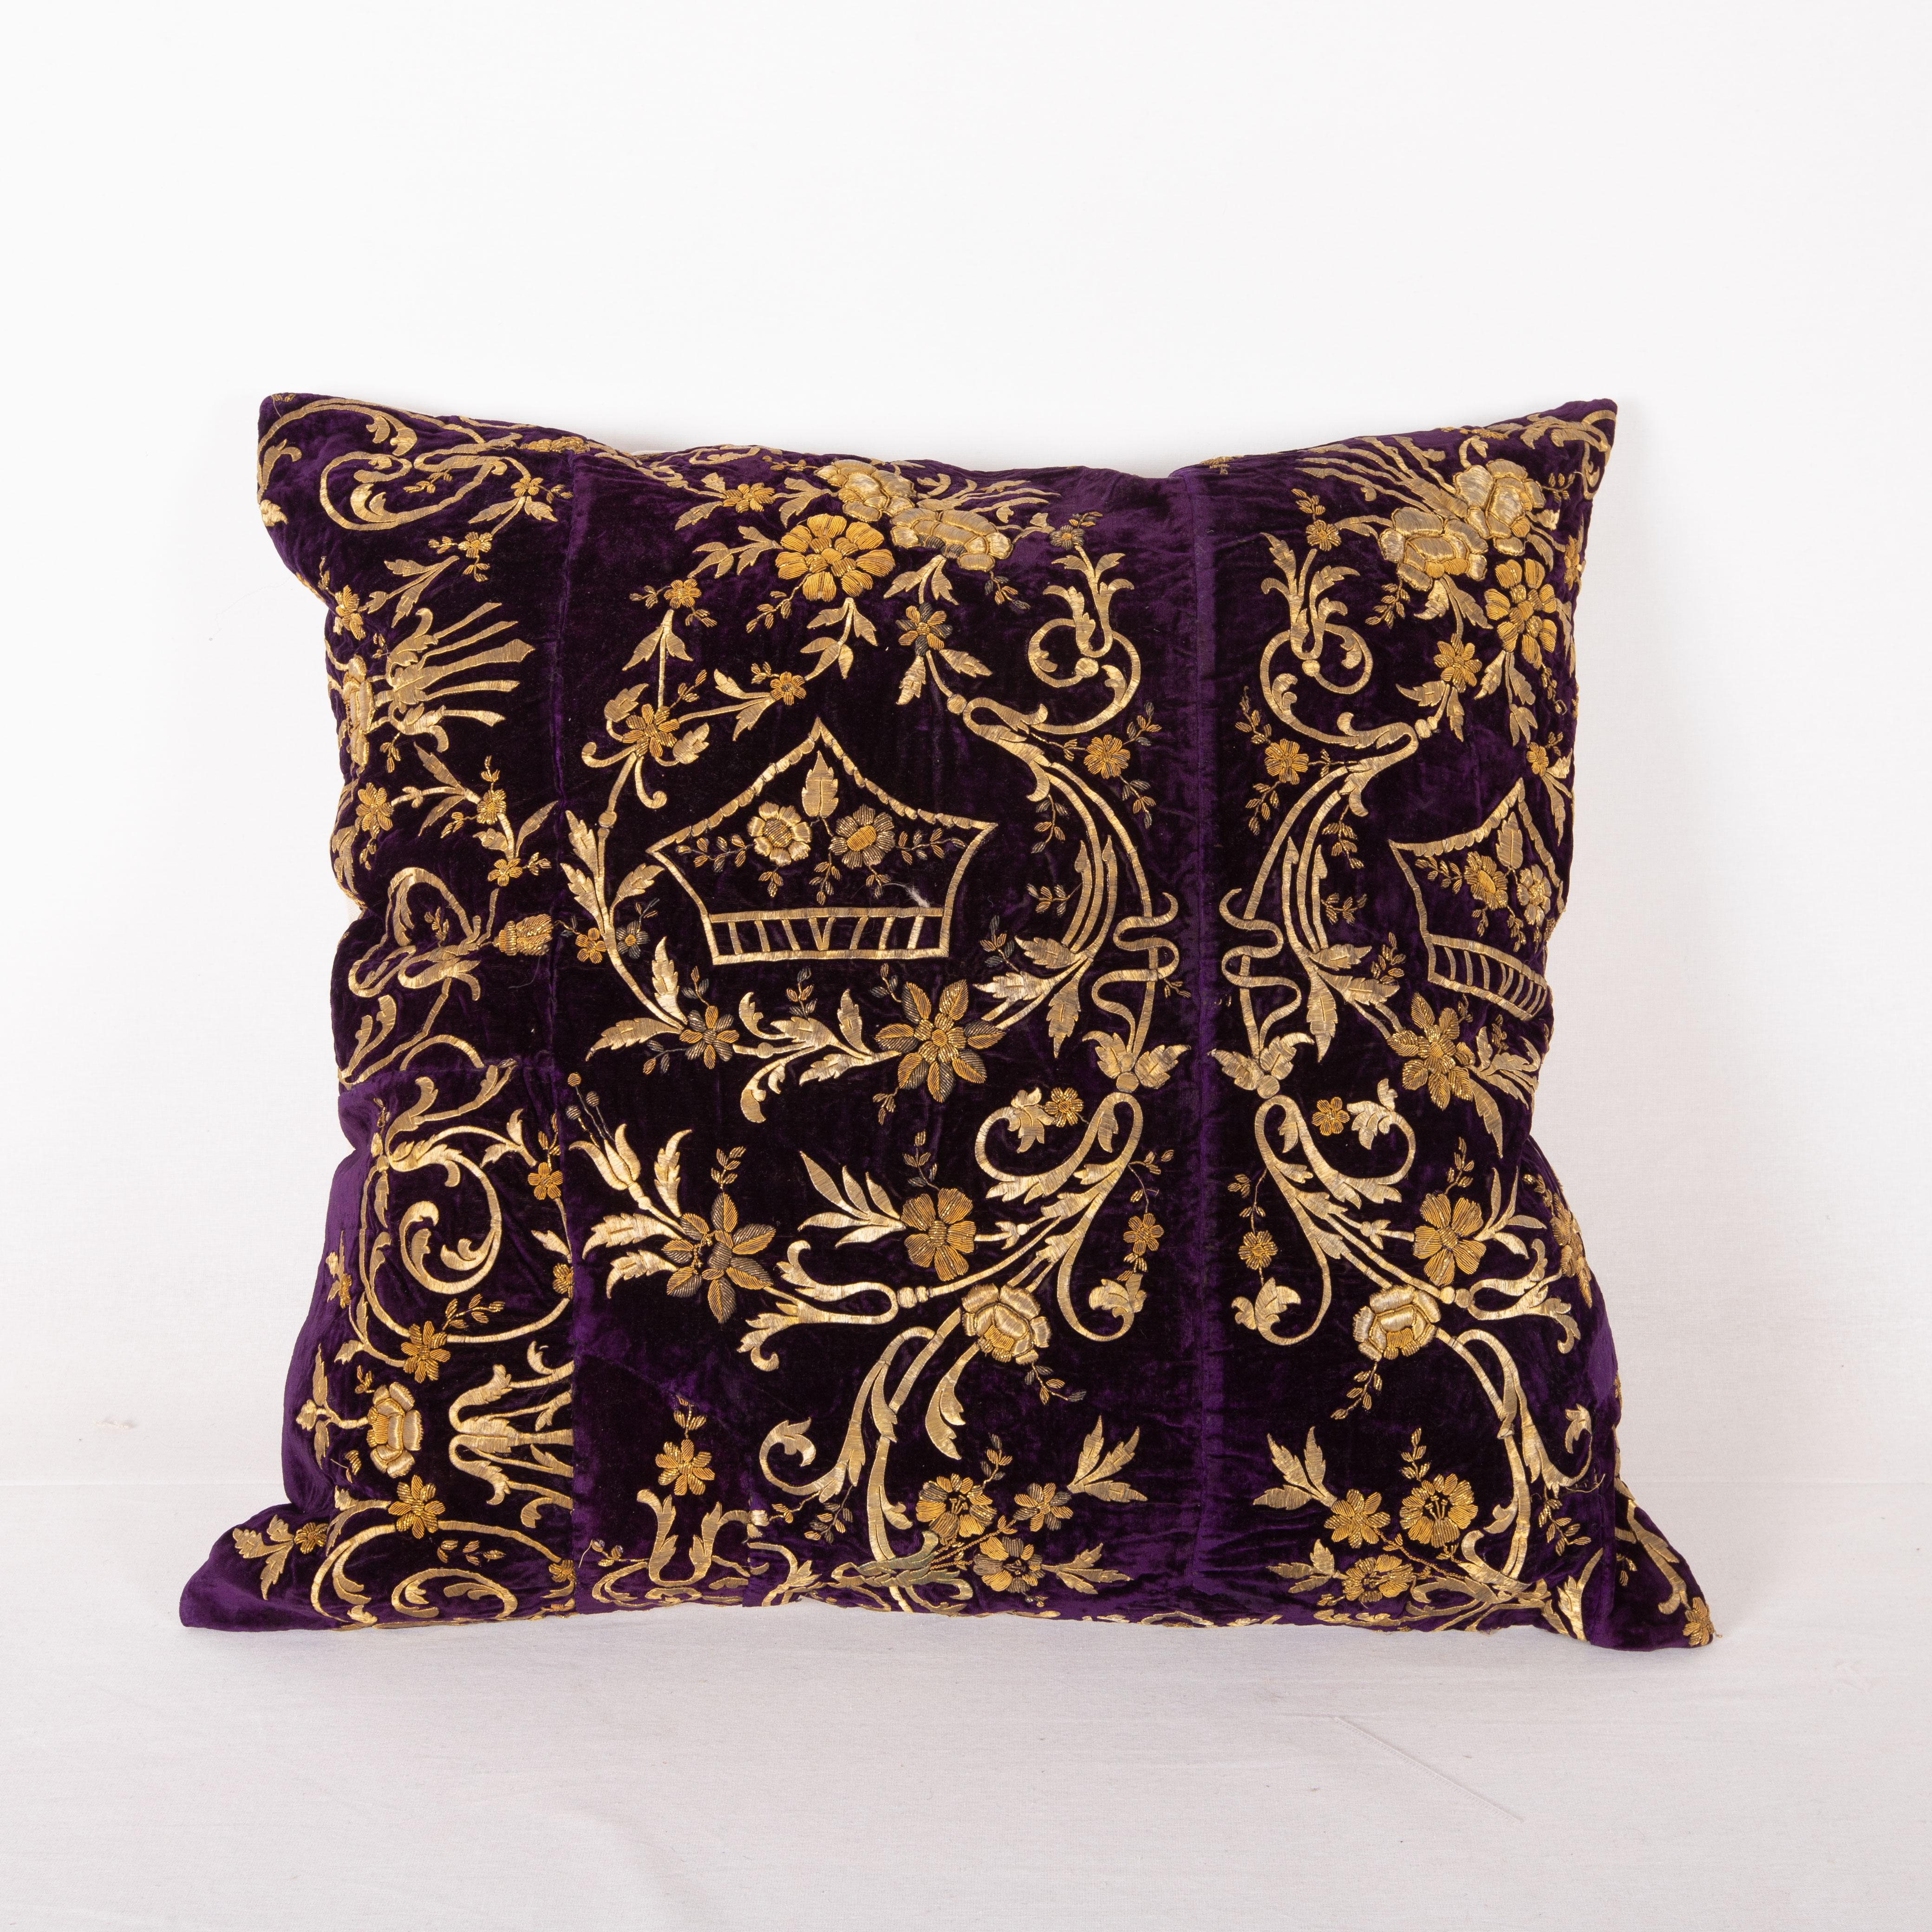 Embroidered Antique Pillow Cover Made from a Silk Velvet Sarma Embroidery Fragment., L 19th 